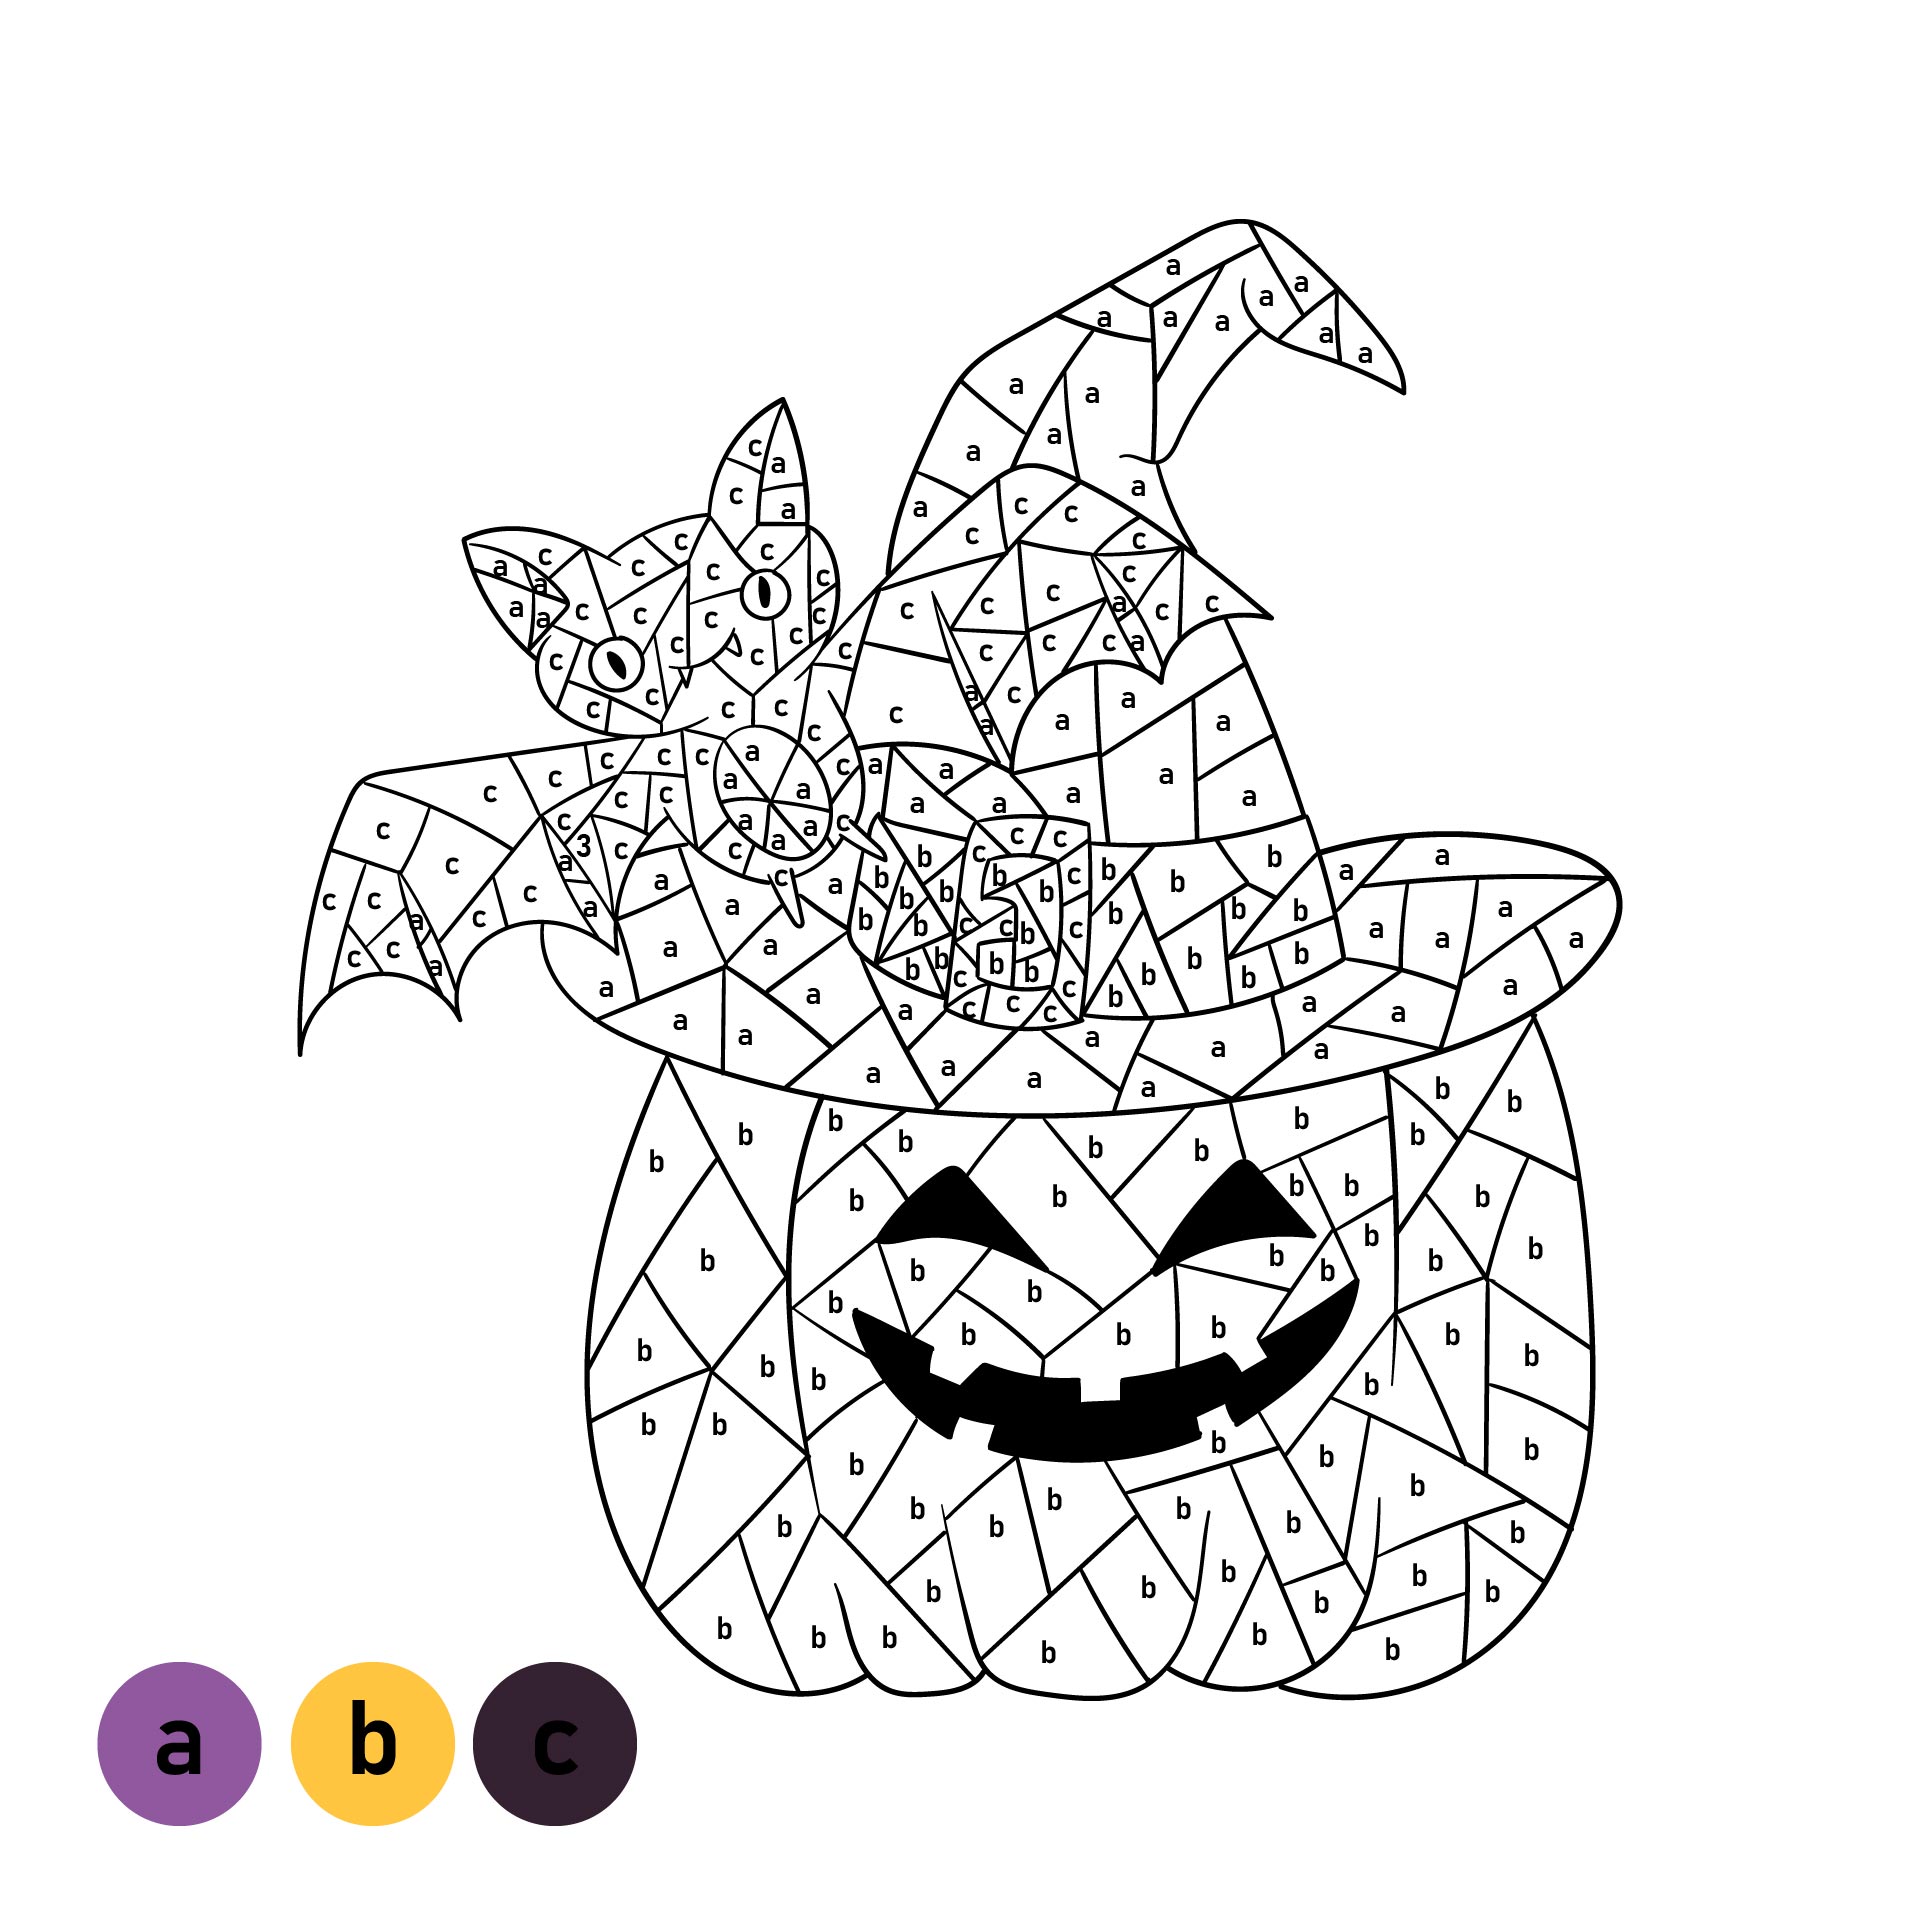 Halloween Color by Letter Coloring Pages